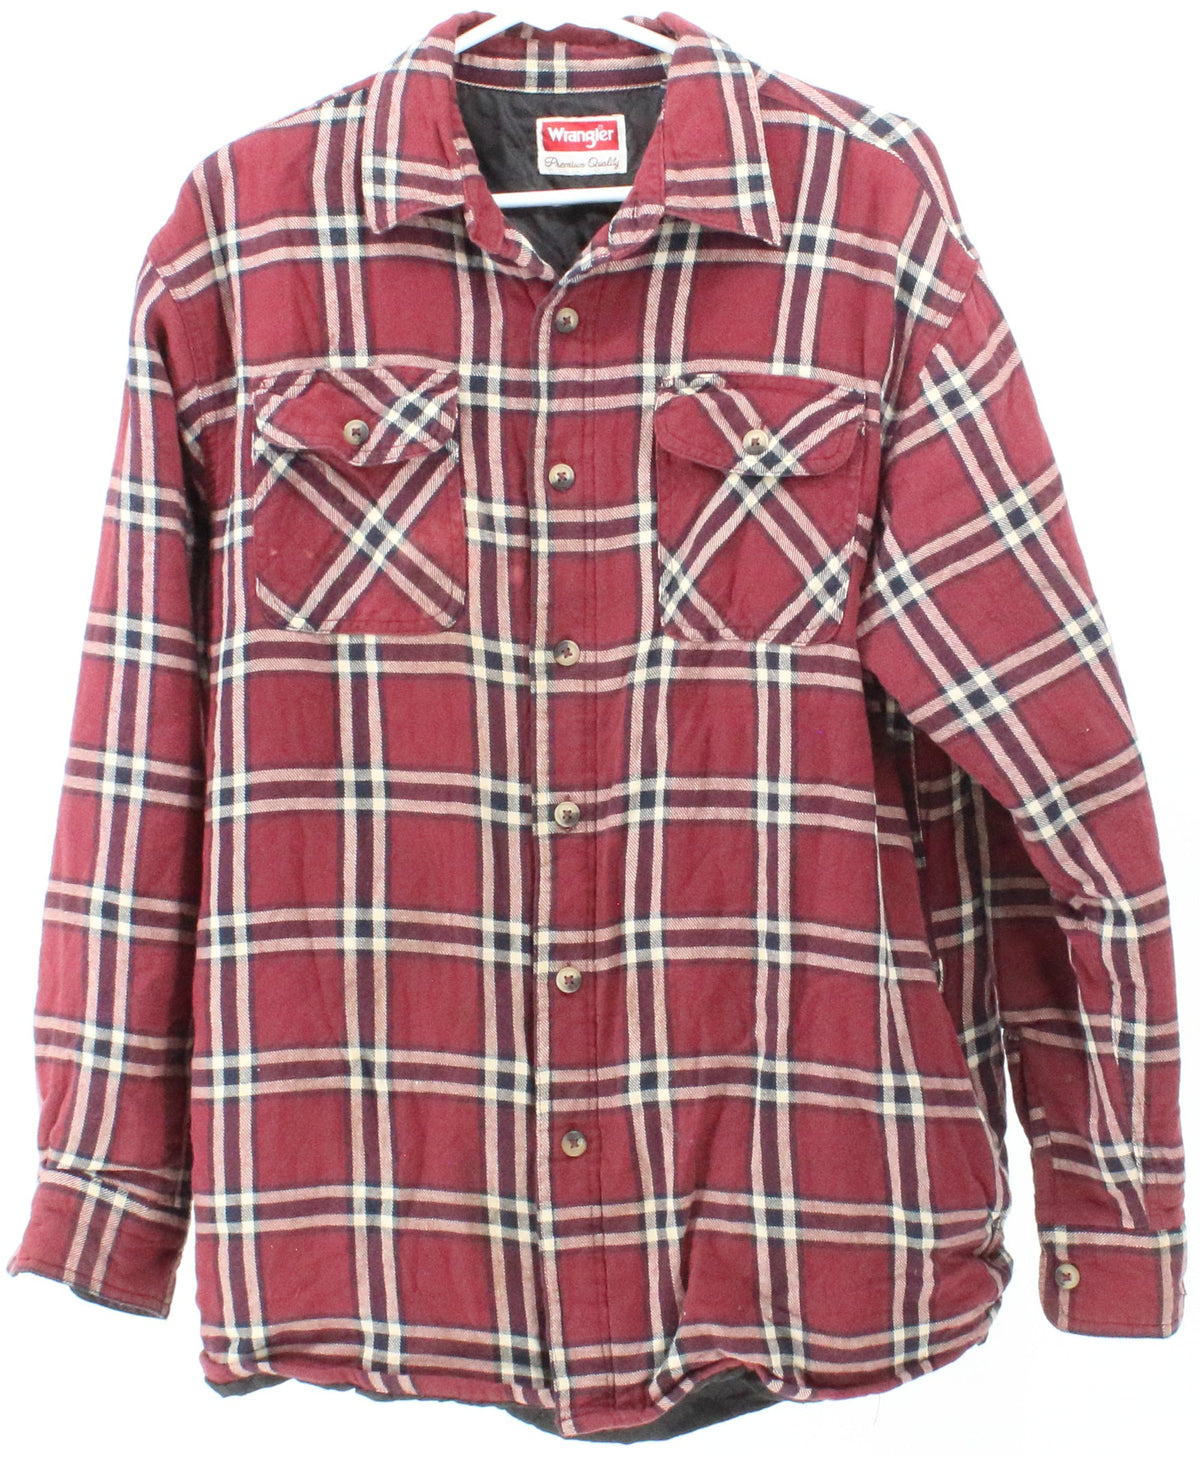 Wrangler Premium Quality Burgundy and Beige Plaid Shirt With Quilt Lining